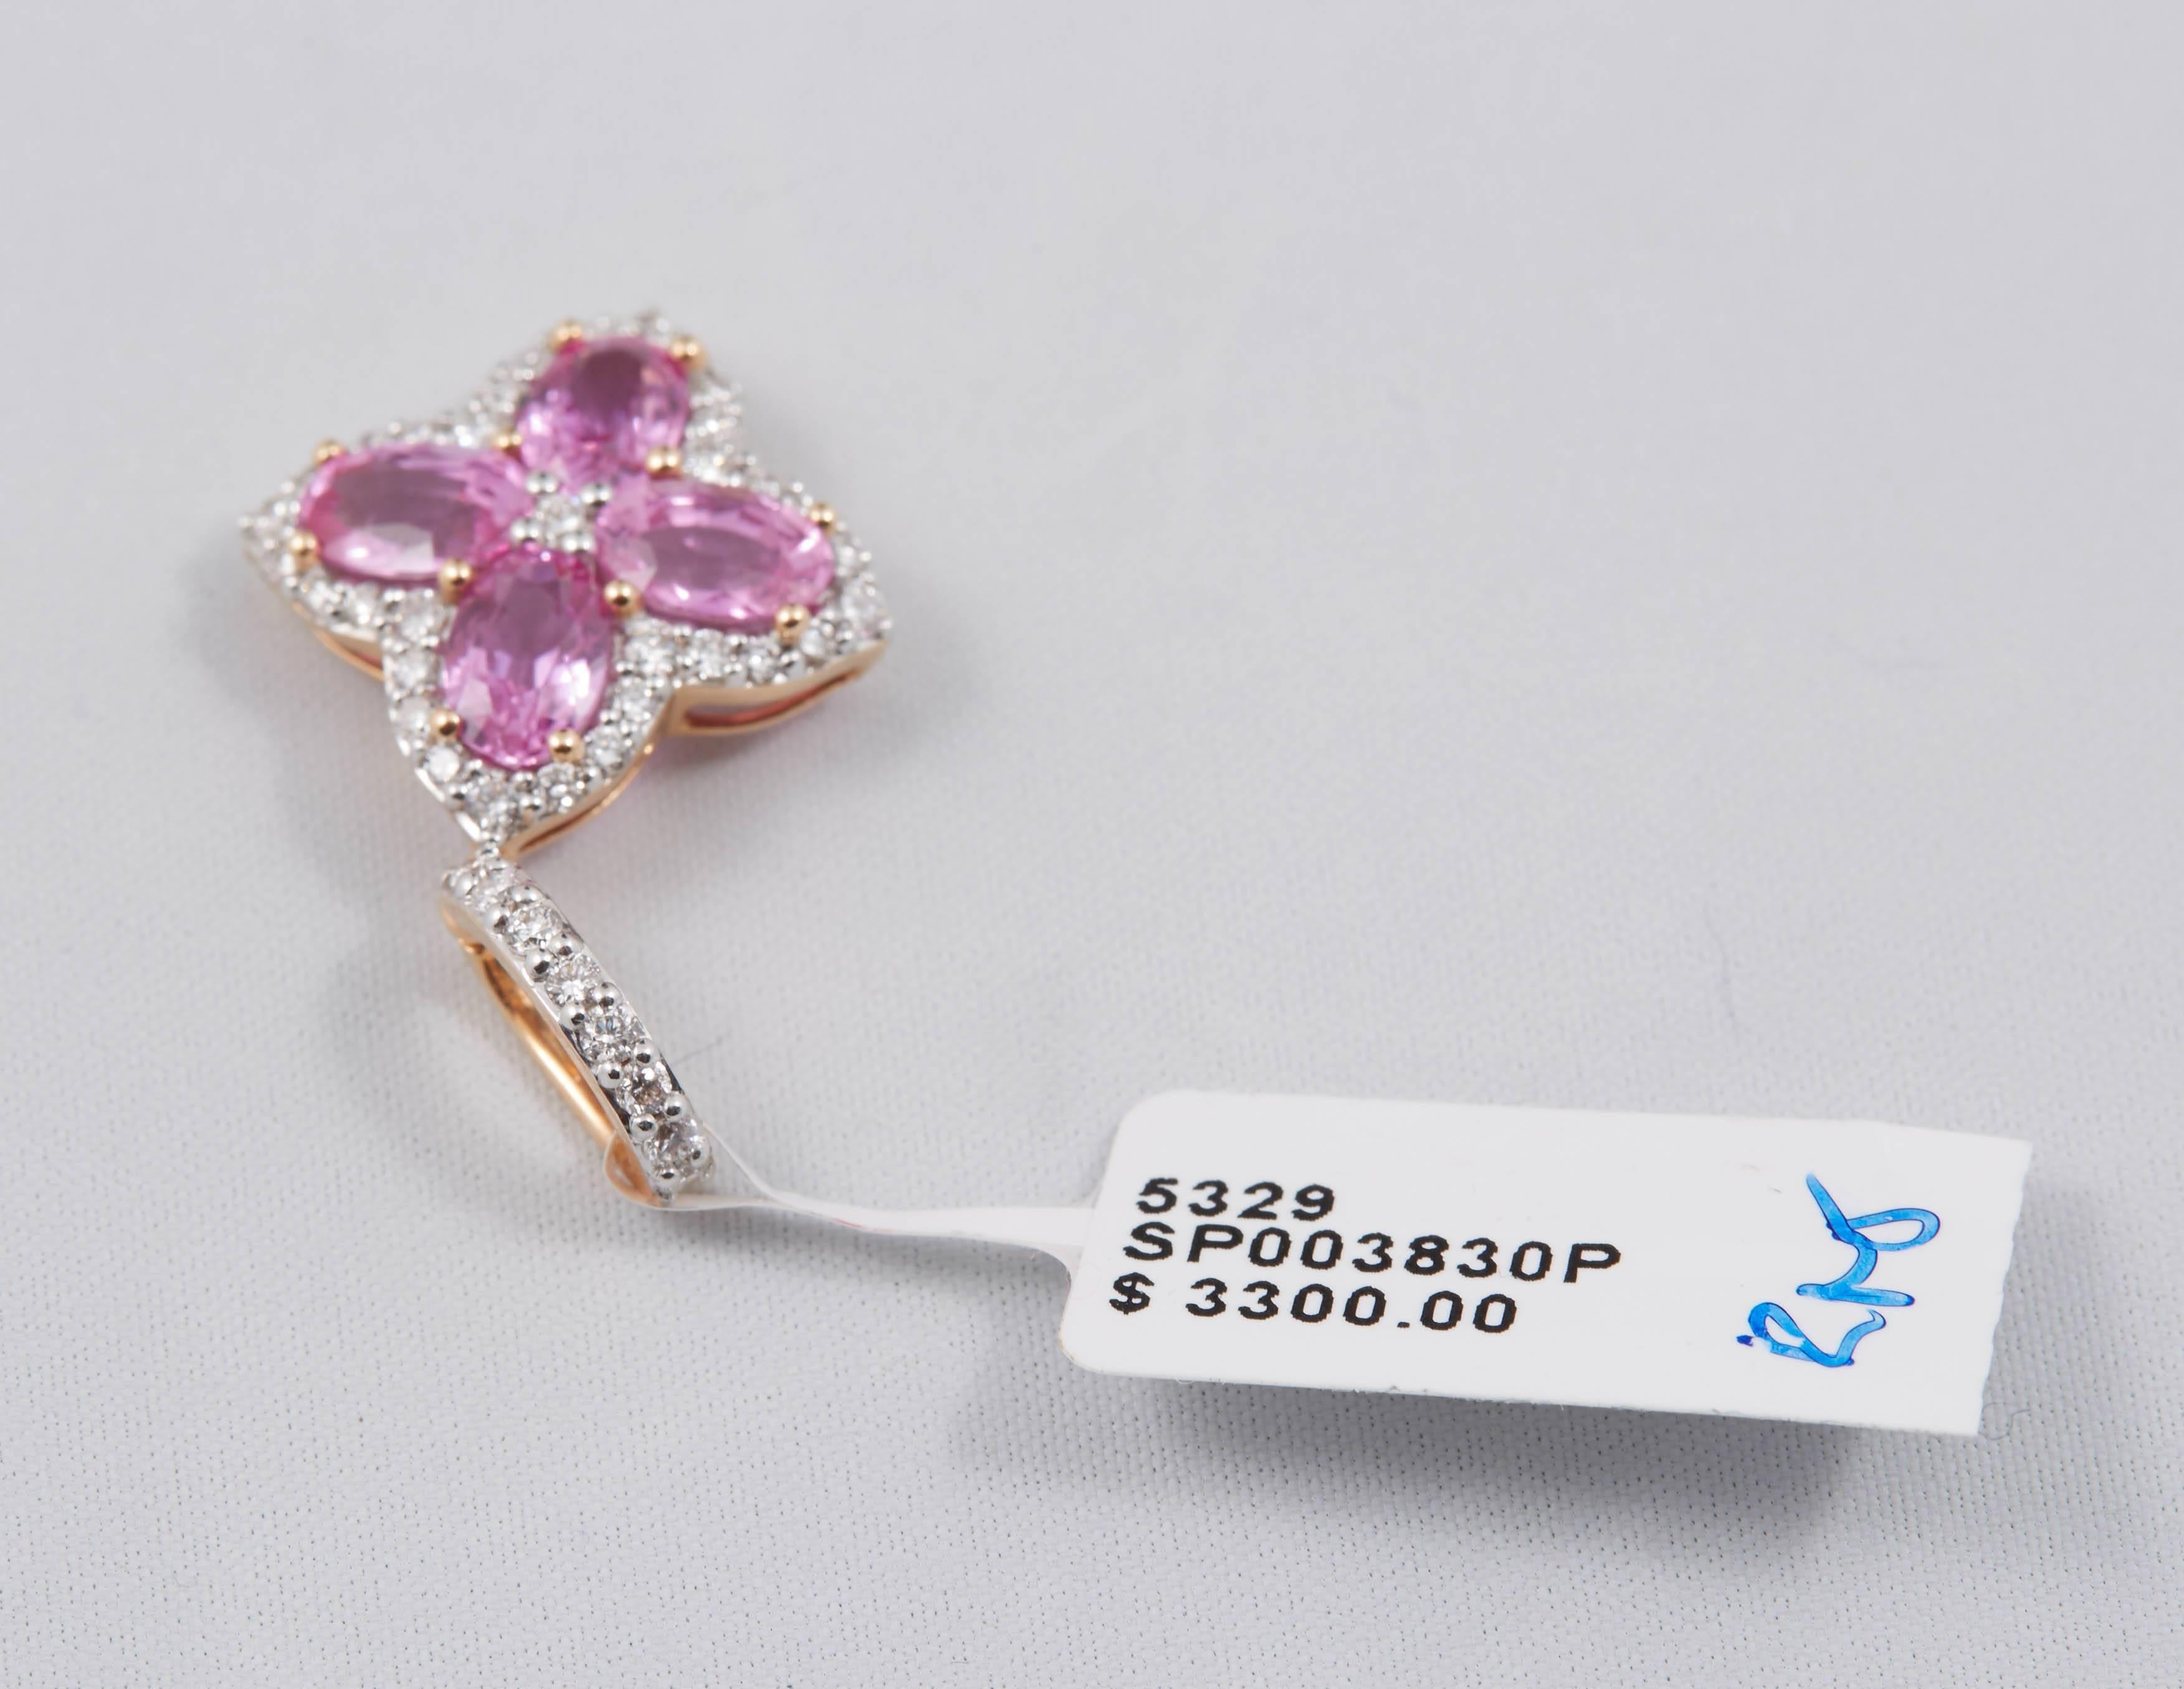 18K Rose Gold 2.1 G.
4 pink sapphires 2.39 Cts.
41 round diamonds 0.42 Cts.